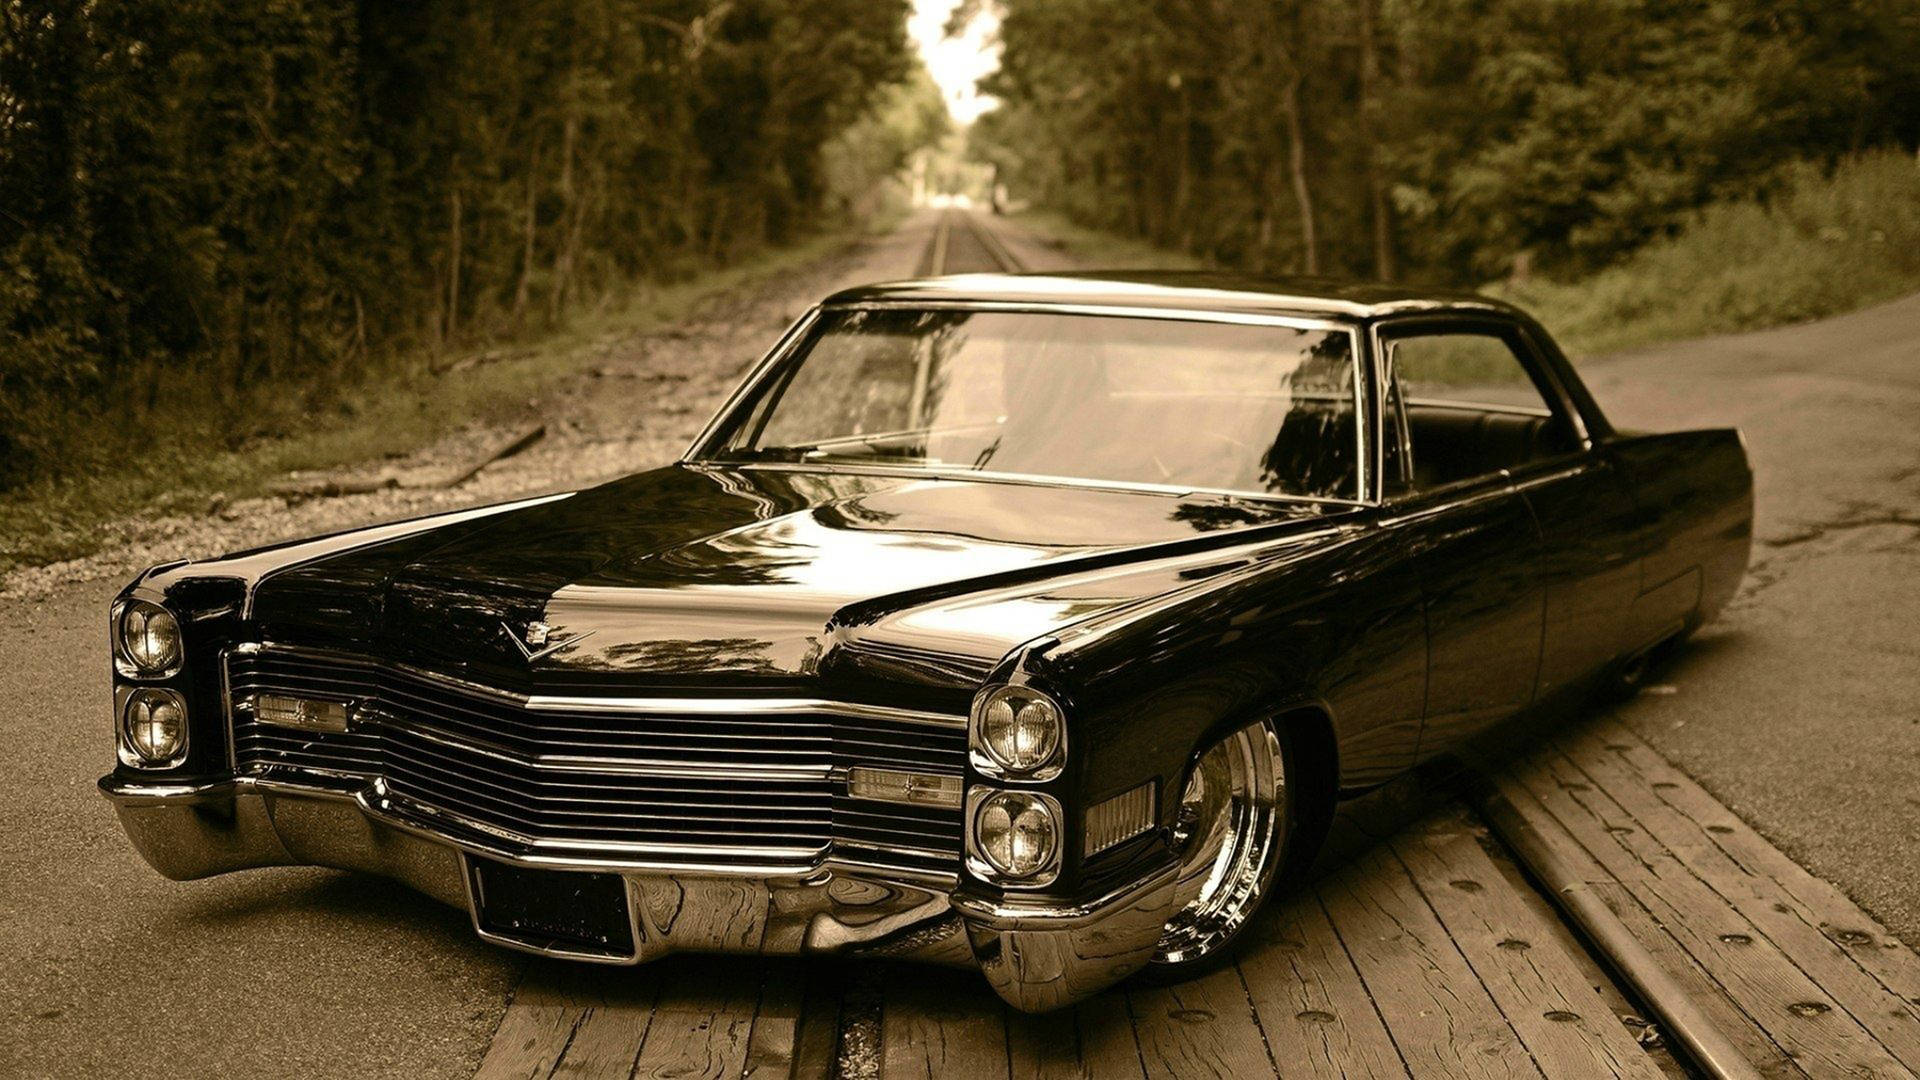 Shimmering Classic - The 1967 Chevrolet Impala